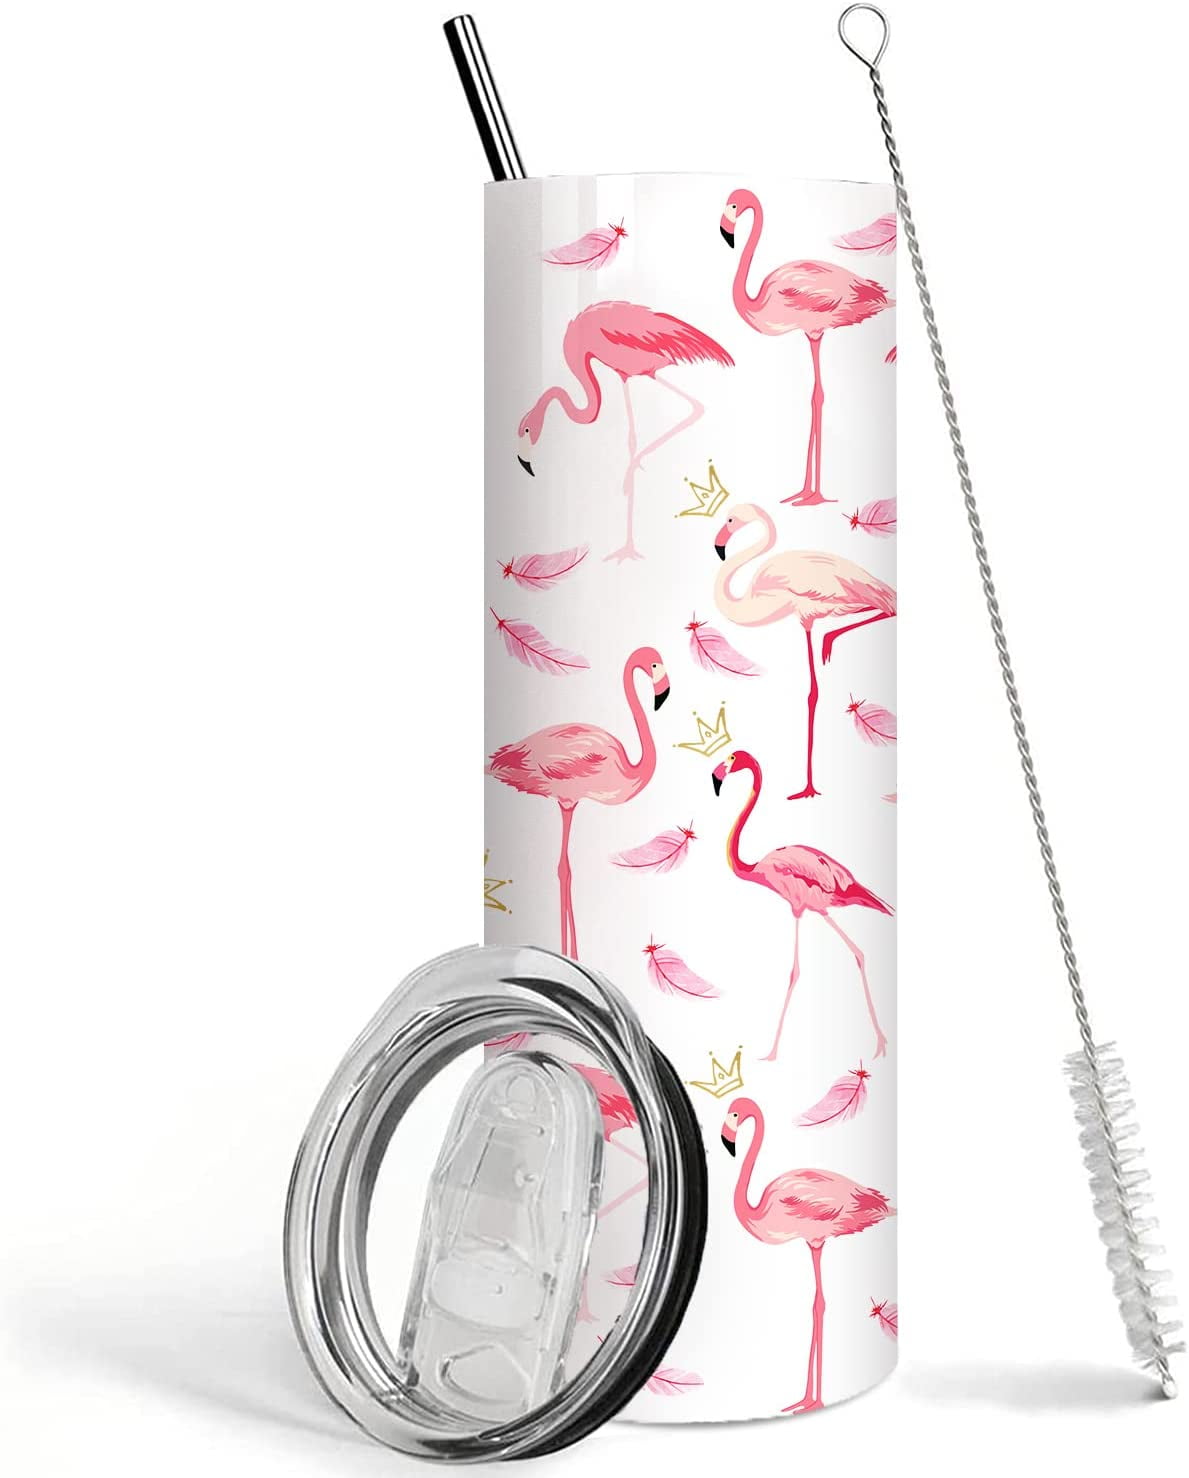 Flamingo Tumbler-Flamingo Gifts for Women-Pink Flamingo Cup,Flamingo  Lovers, Teenage Girls, Sister,Best Friends,Gift for Her, Daughter,  Mom,Happy Birthday Gifts-20 OZ Tumblers With Lids and Straws 